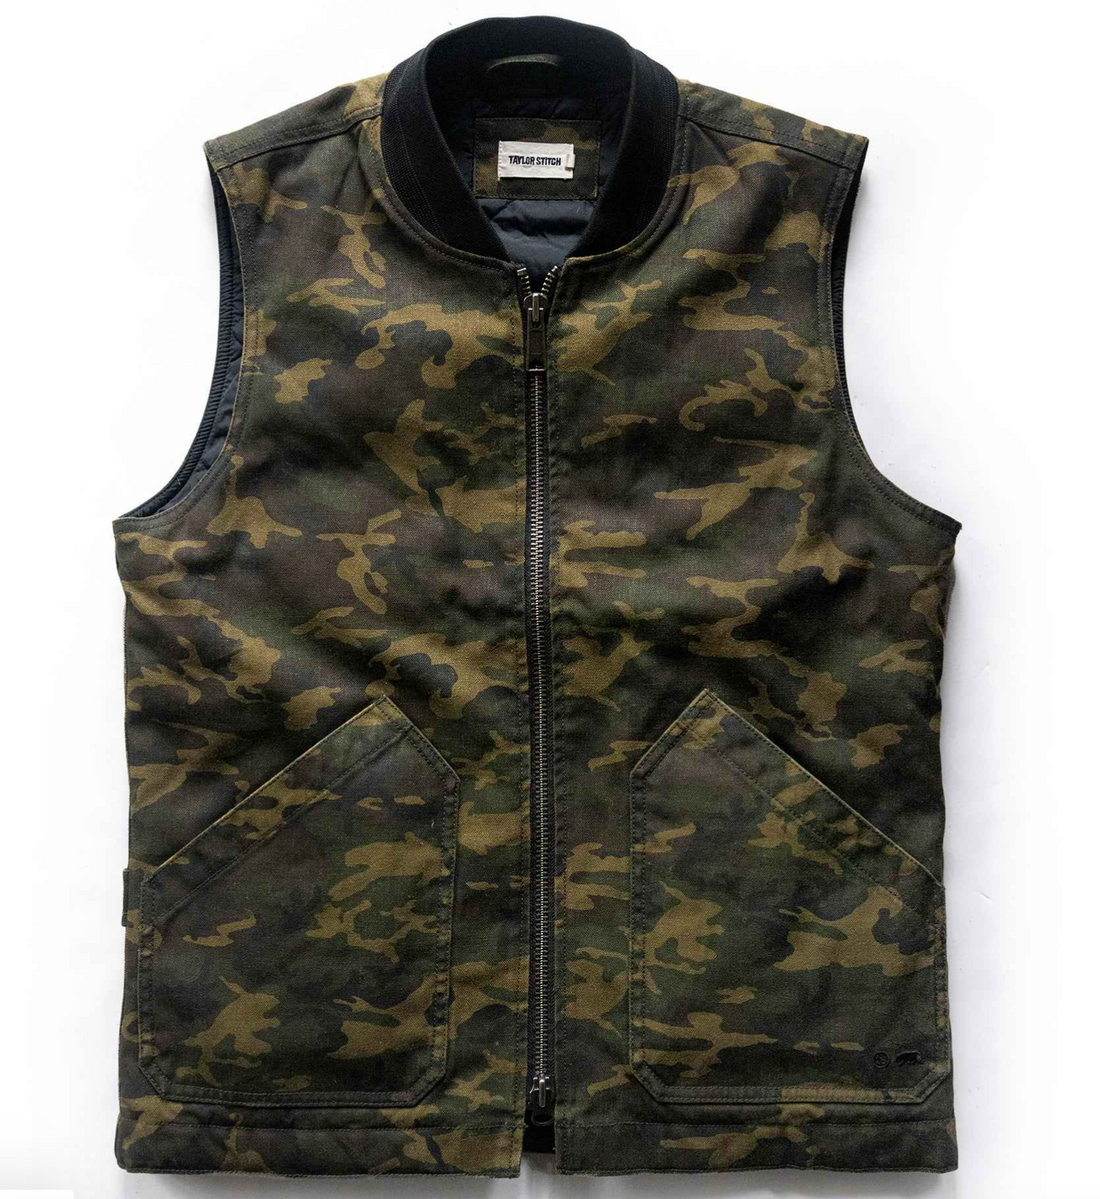 Taylor Stitch - The Workhorse Vest in Camo Boss Duck